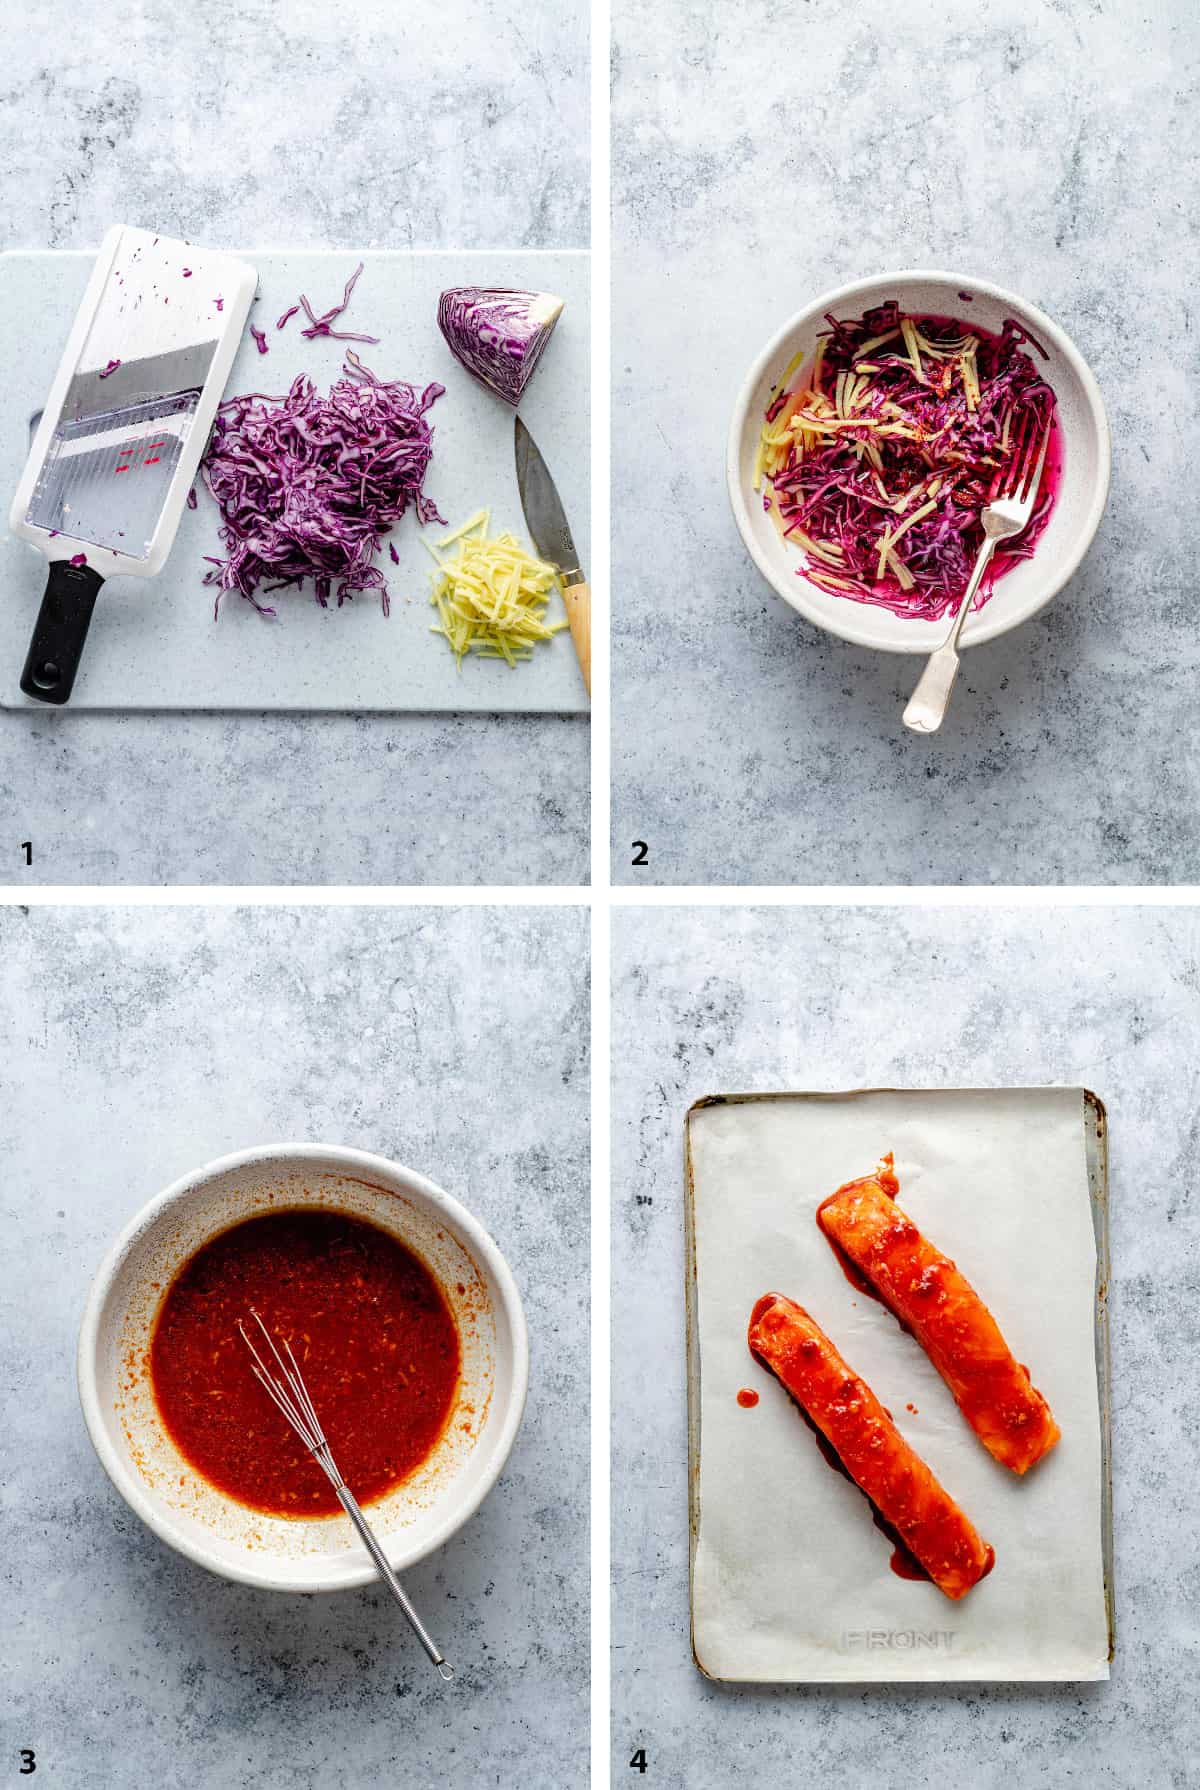 Process steps making the quick pickle, gochujang sauce and marinating the salmon.